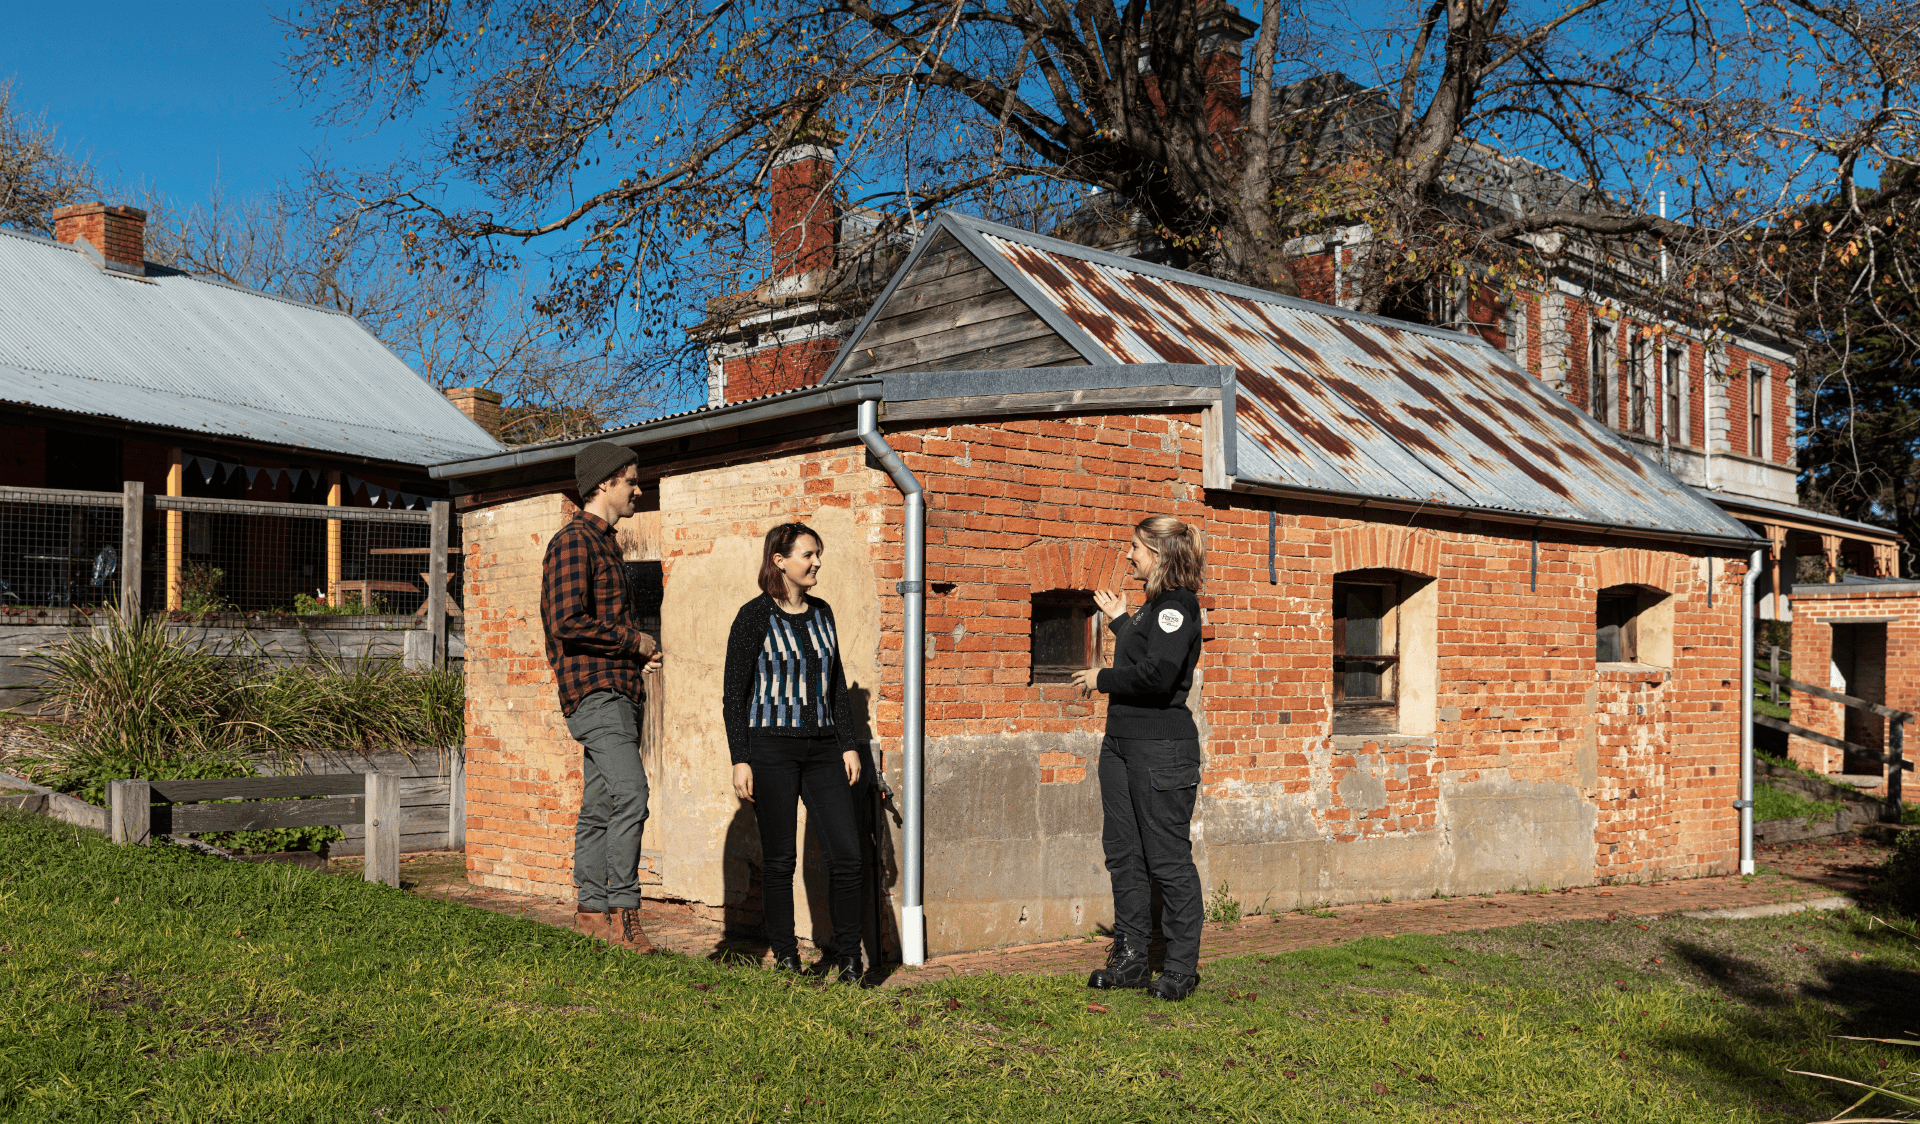 A Parks Victoria Ranger speaks to a couple outside an old building in Coolart Heritage Area